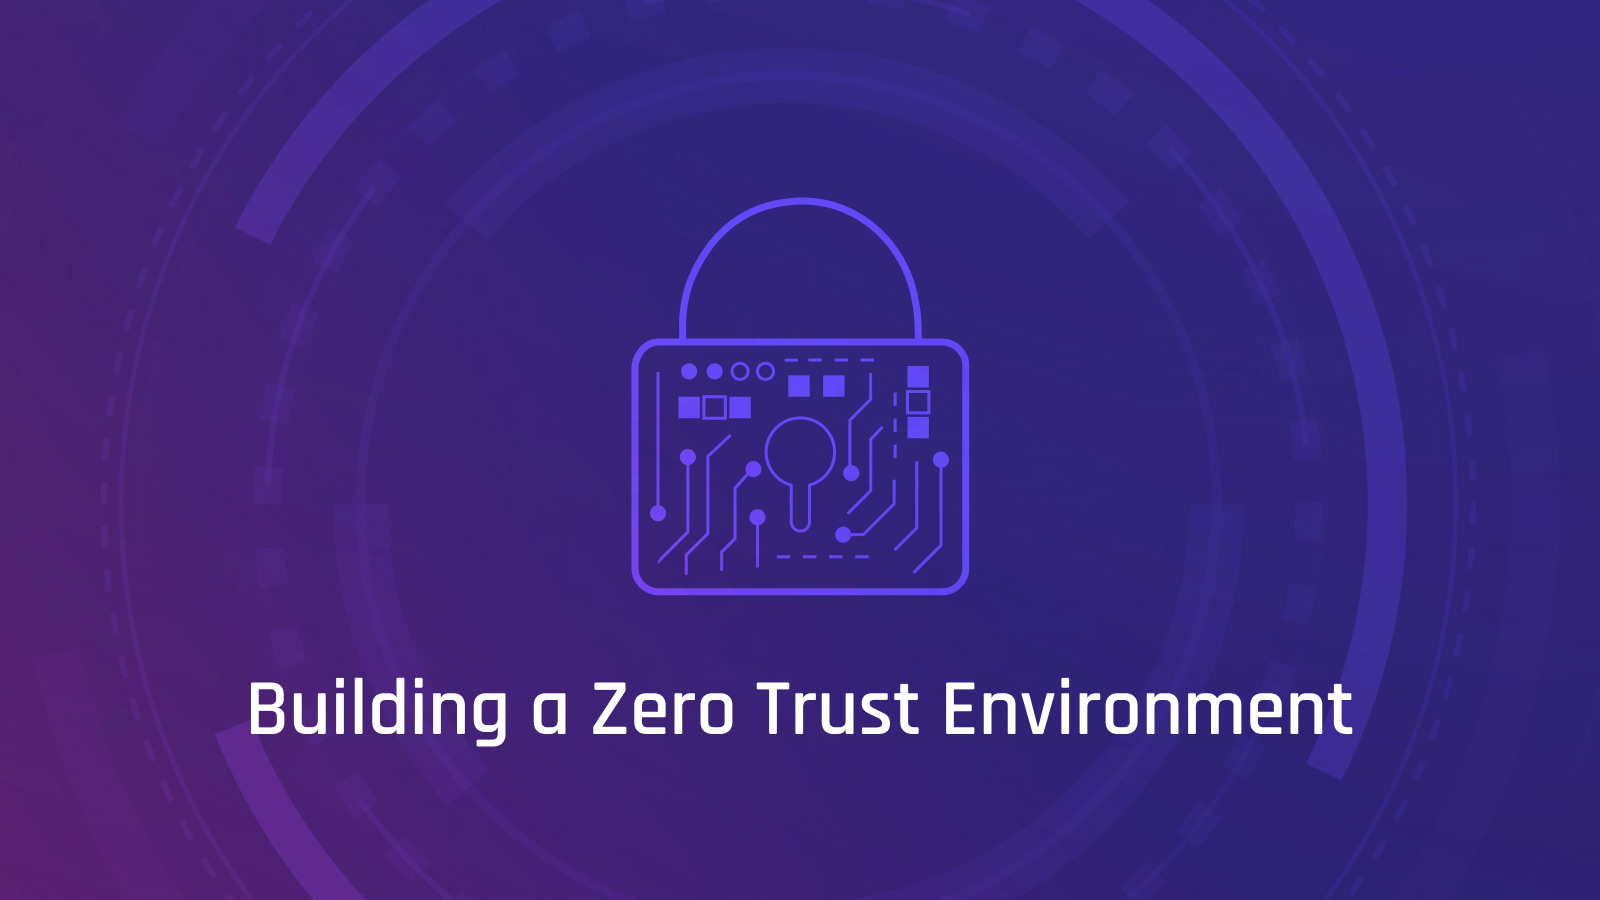 What is a Zero Trust Environment?